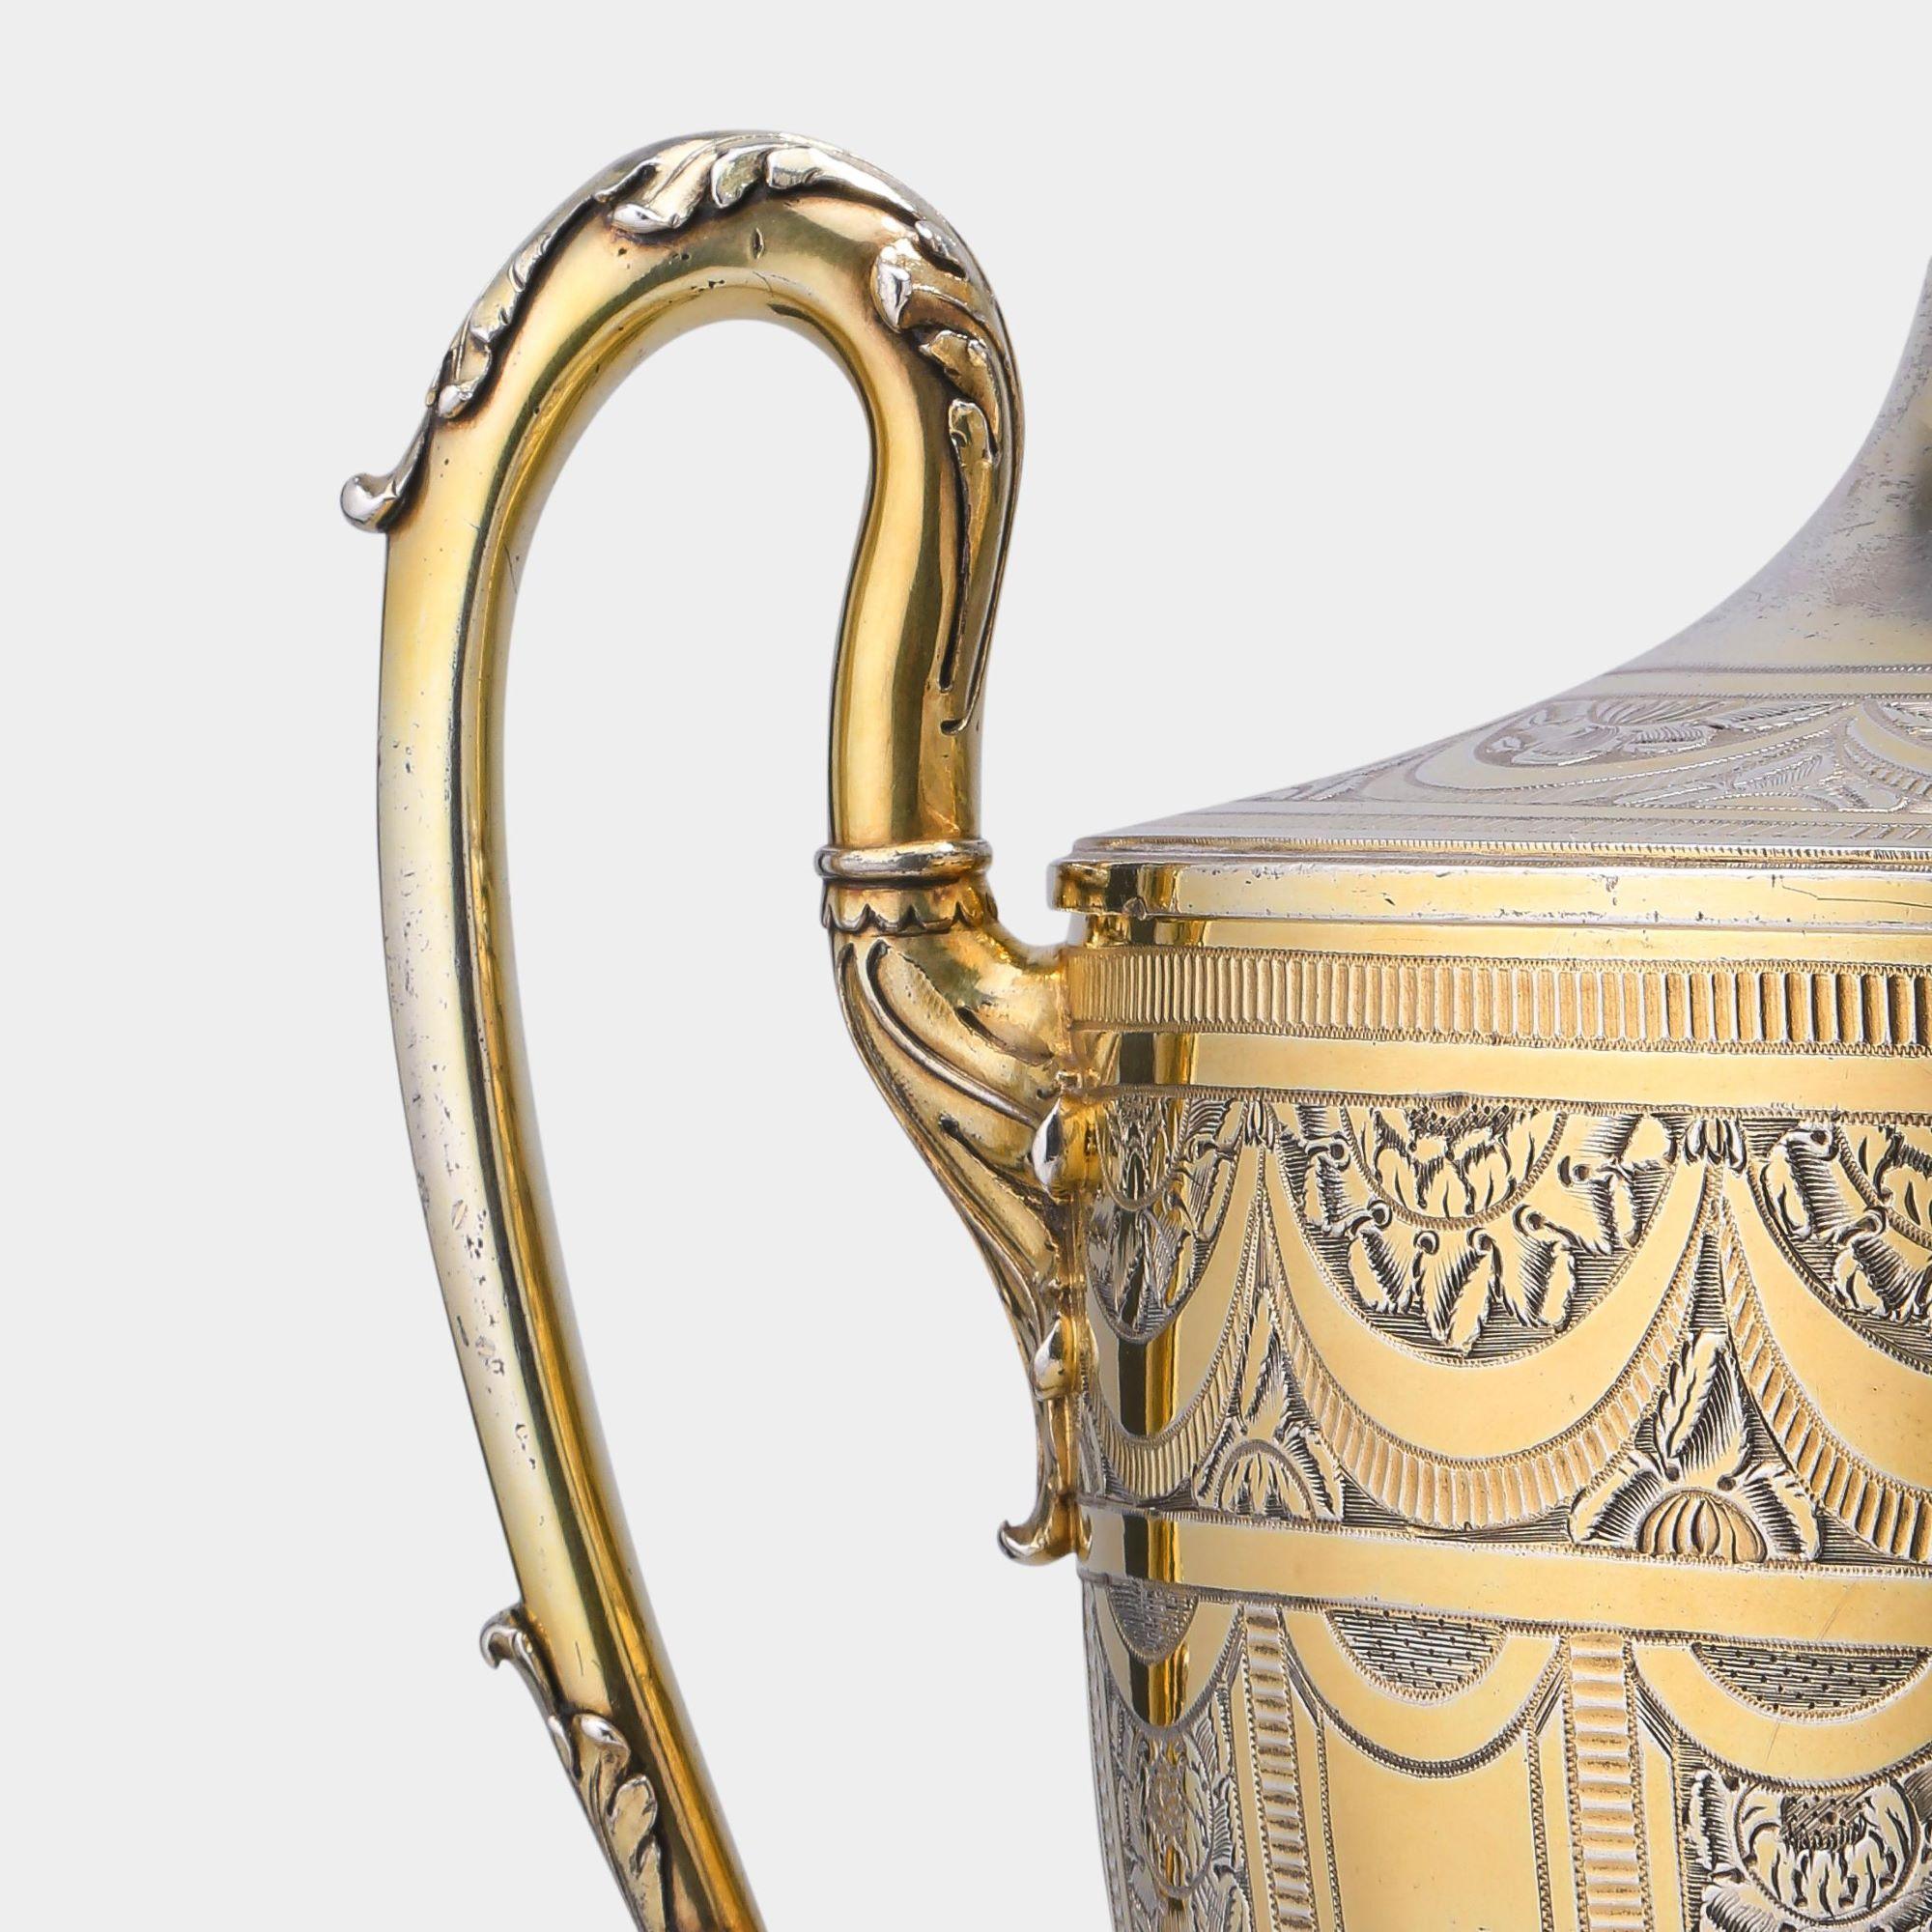 Fine George III silver gilt cup and cover, once the property of the Abel-Smith banking family of Hertfordshire. The Abel-Smiths were also members of the British Royal Family and their crest is described as: Upon a wreath of colours, an elephant head